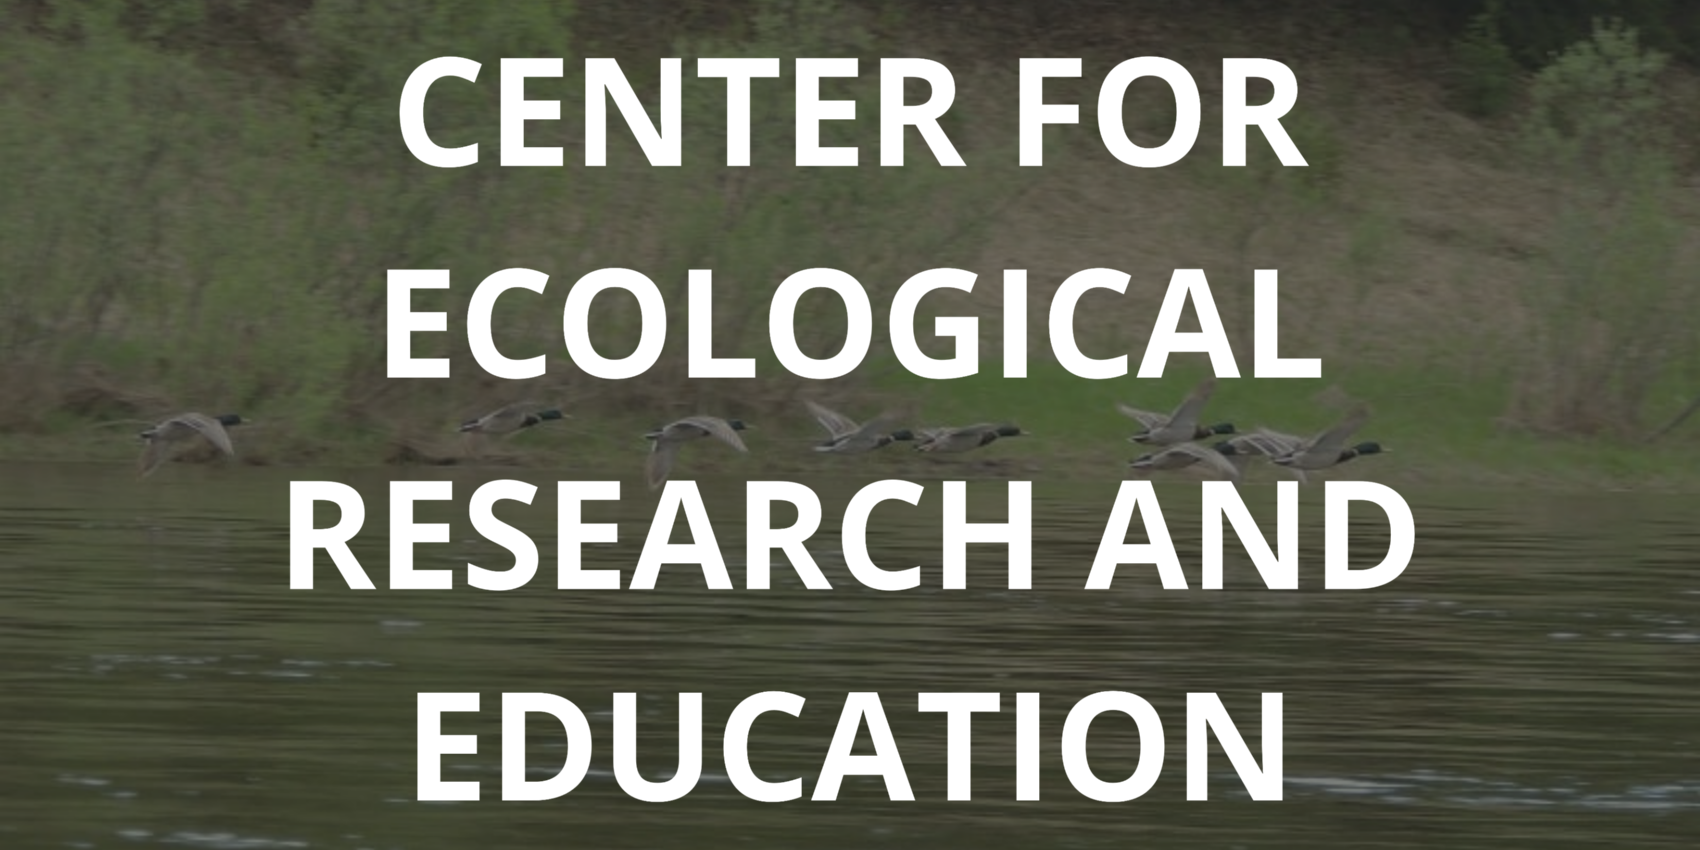 Center%20for%20Ecological%20Research%20and%20Education